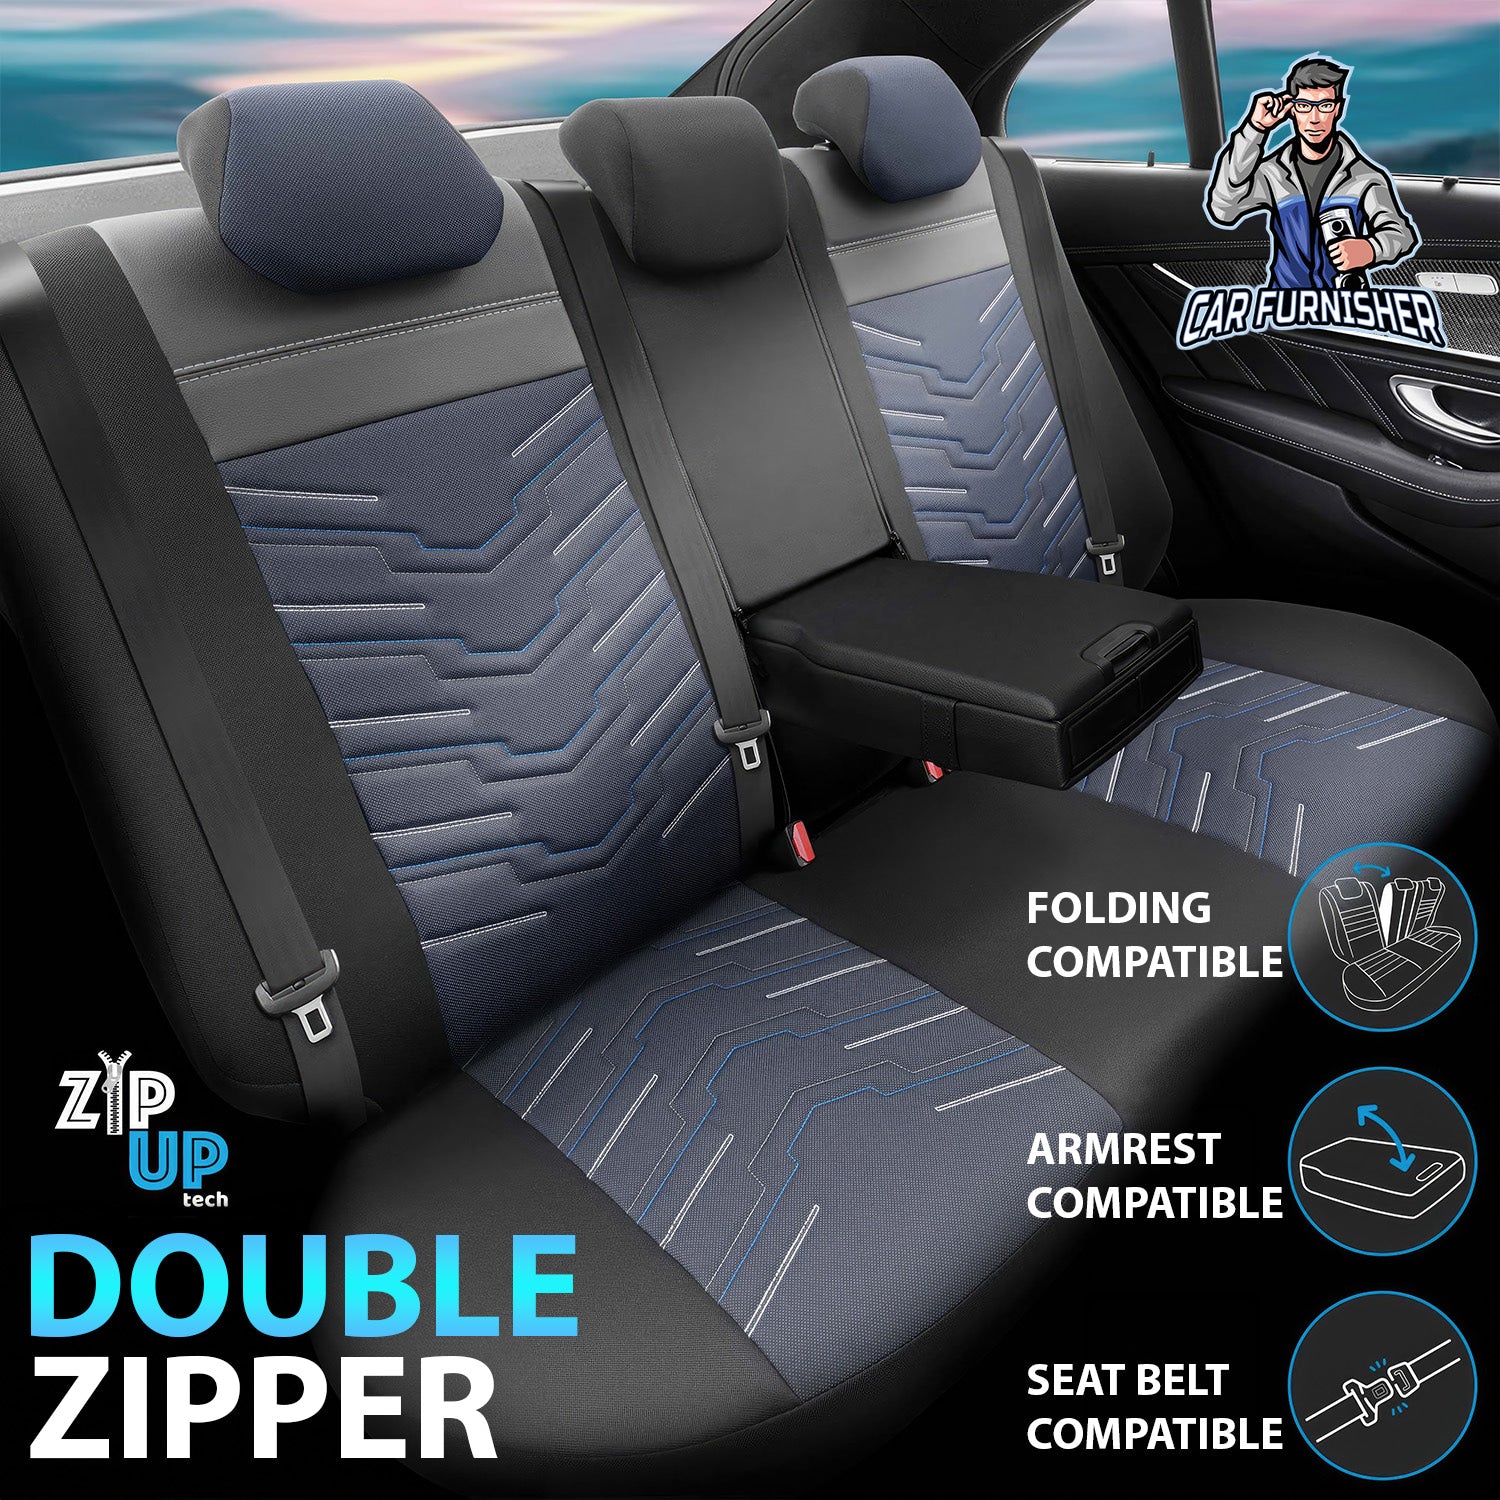 Car Seat Cover Set - Reflective Design Blue 5 Seats + Headrests (Full Set) Leather & Lacoste Fabric